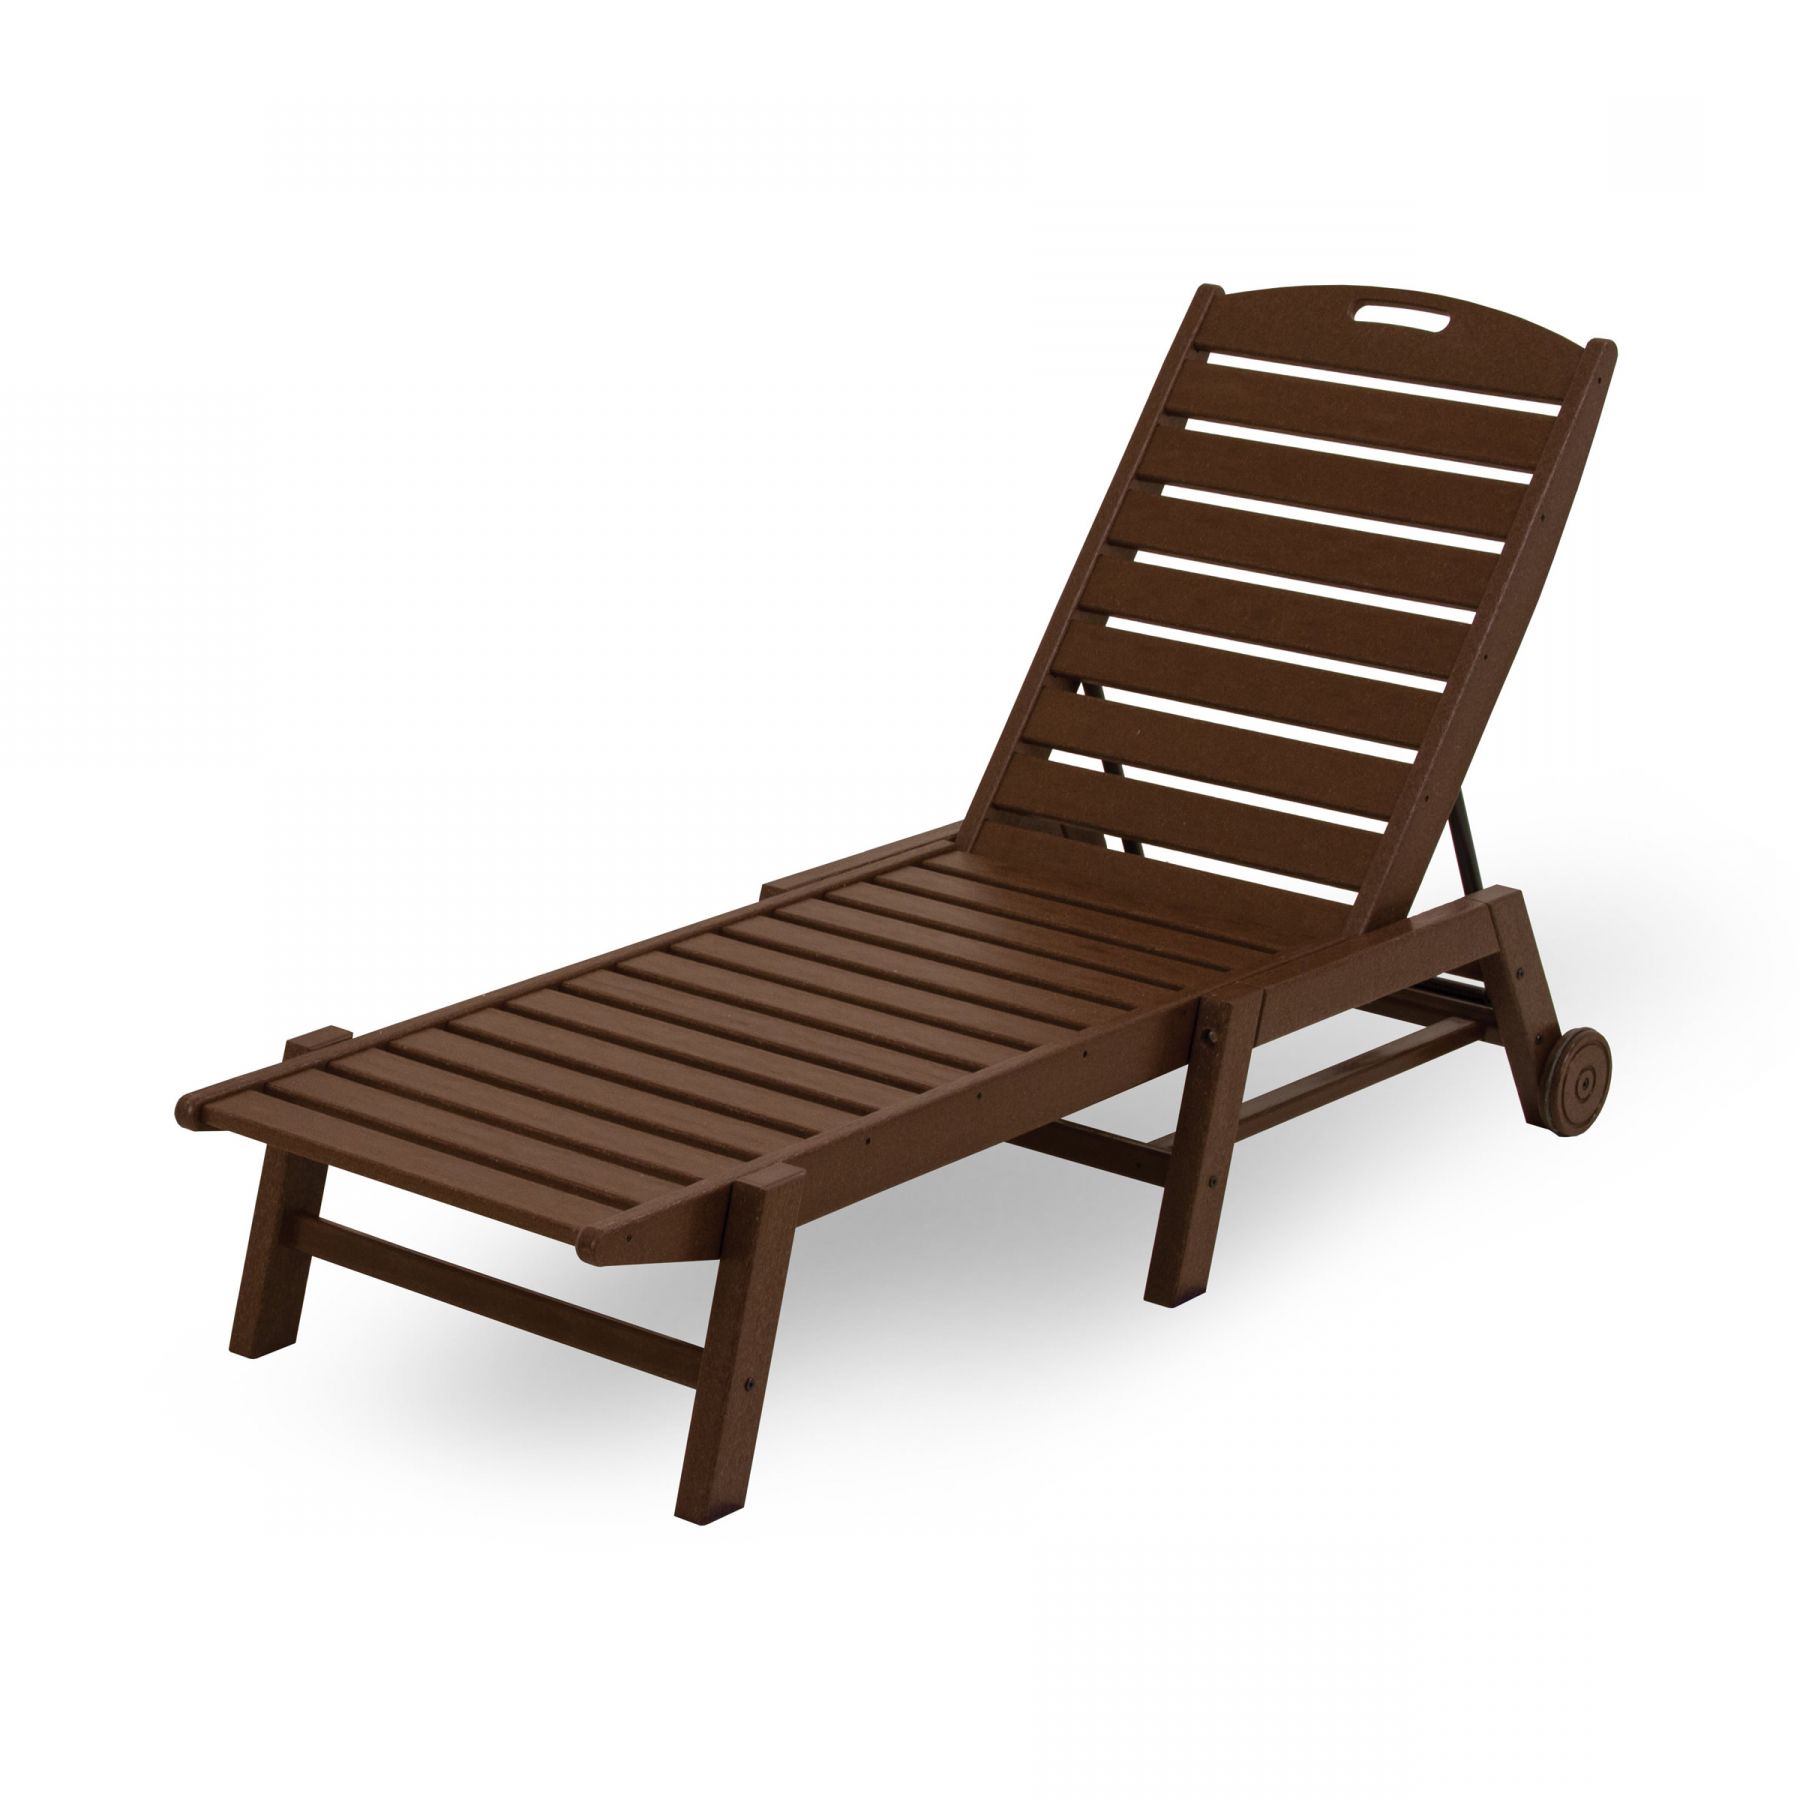 Most Recent Nautical Wheeled Stackable Chaise Lounges Regarding Polywood Nautical Wheeled Chaise Lounge Set Ashley Furniture (View 9 of 25)